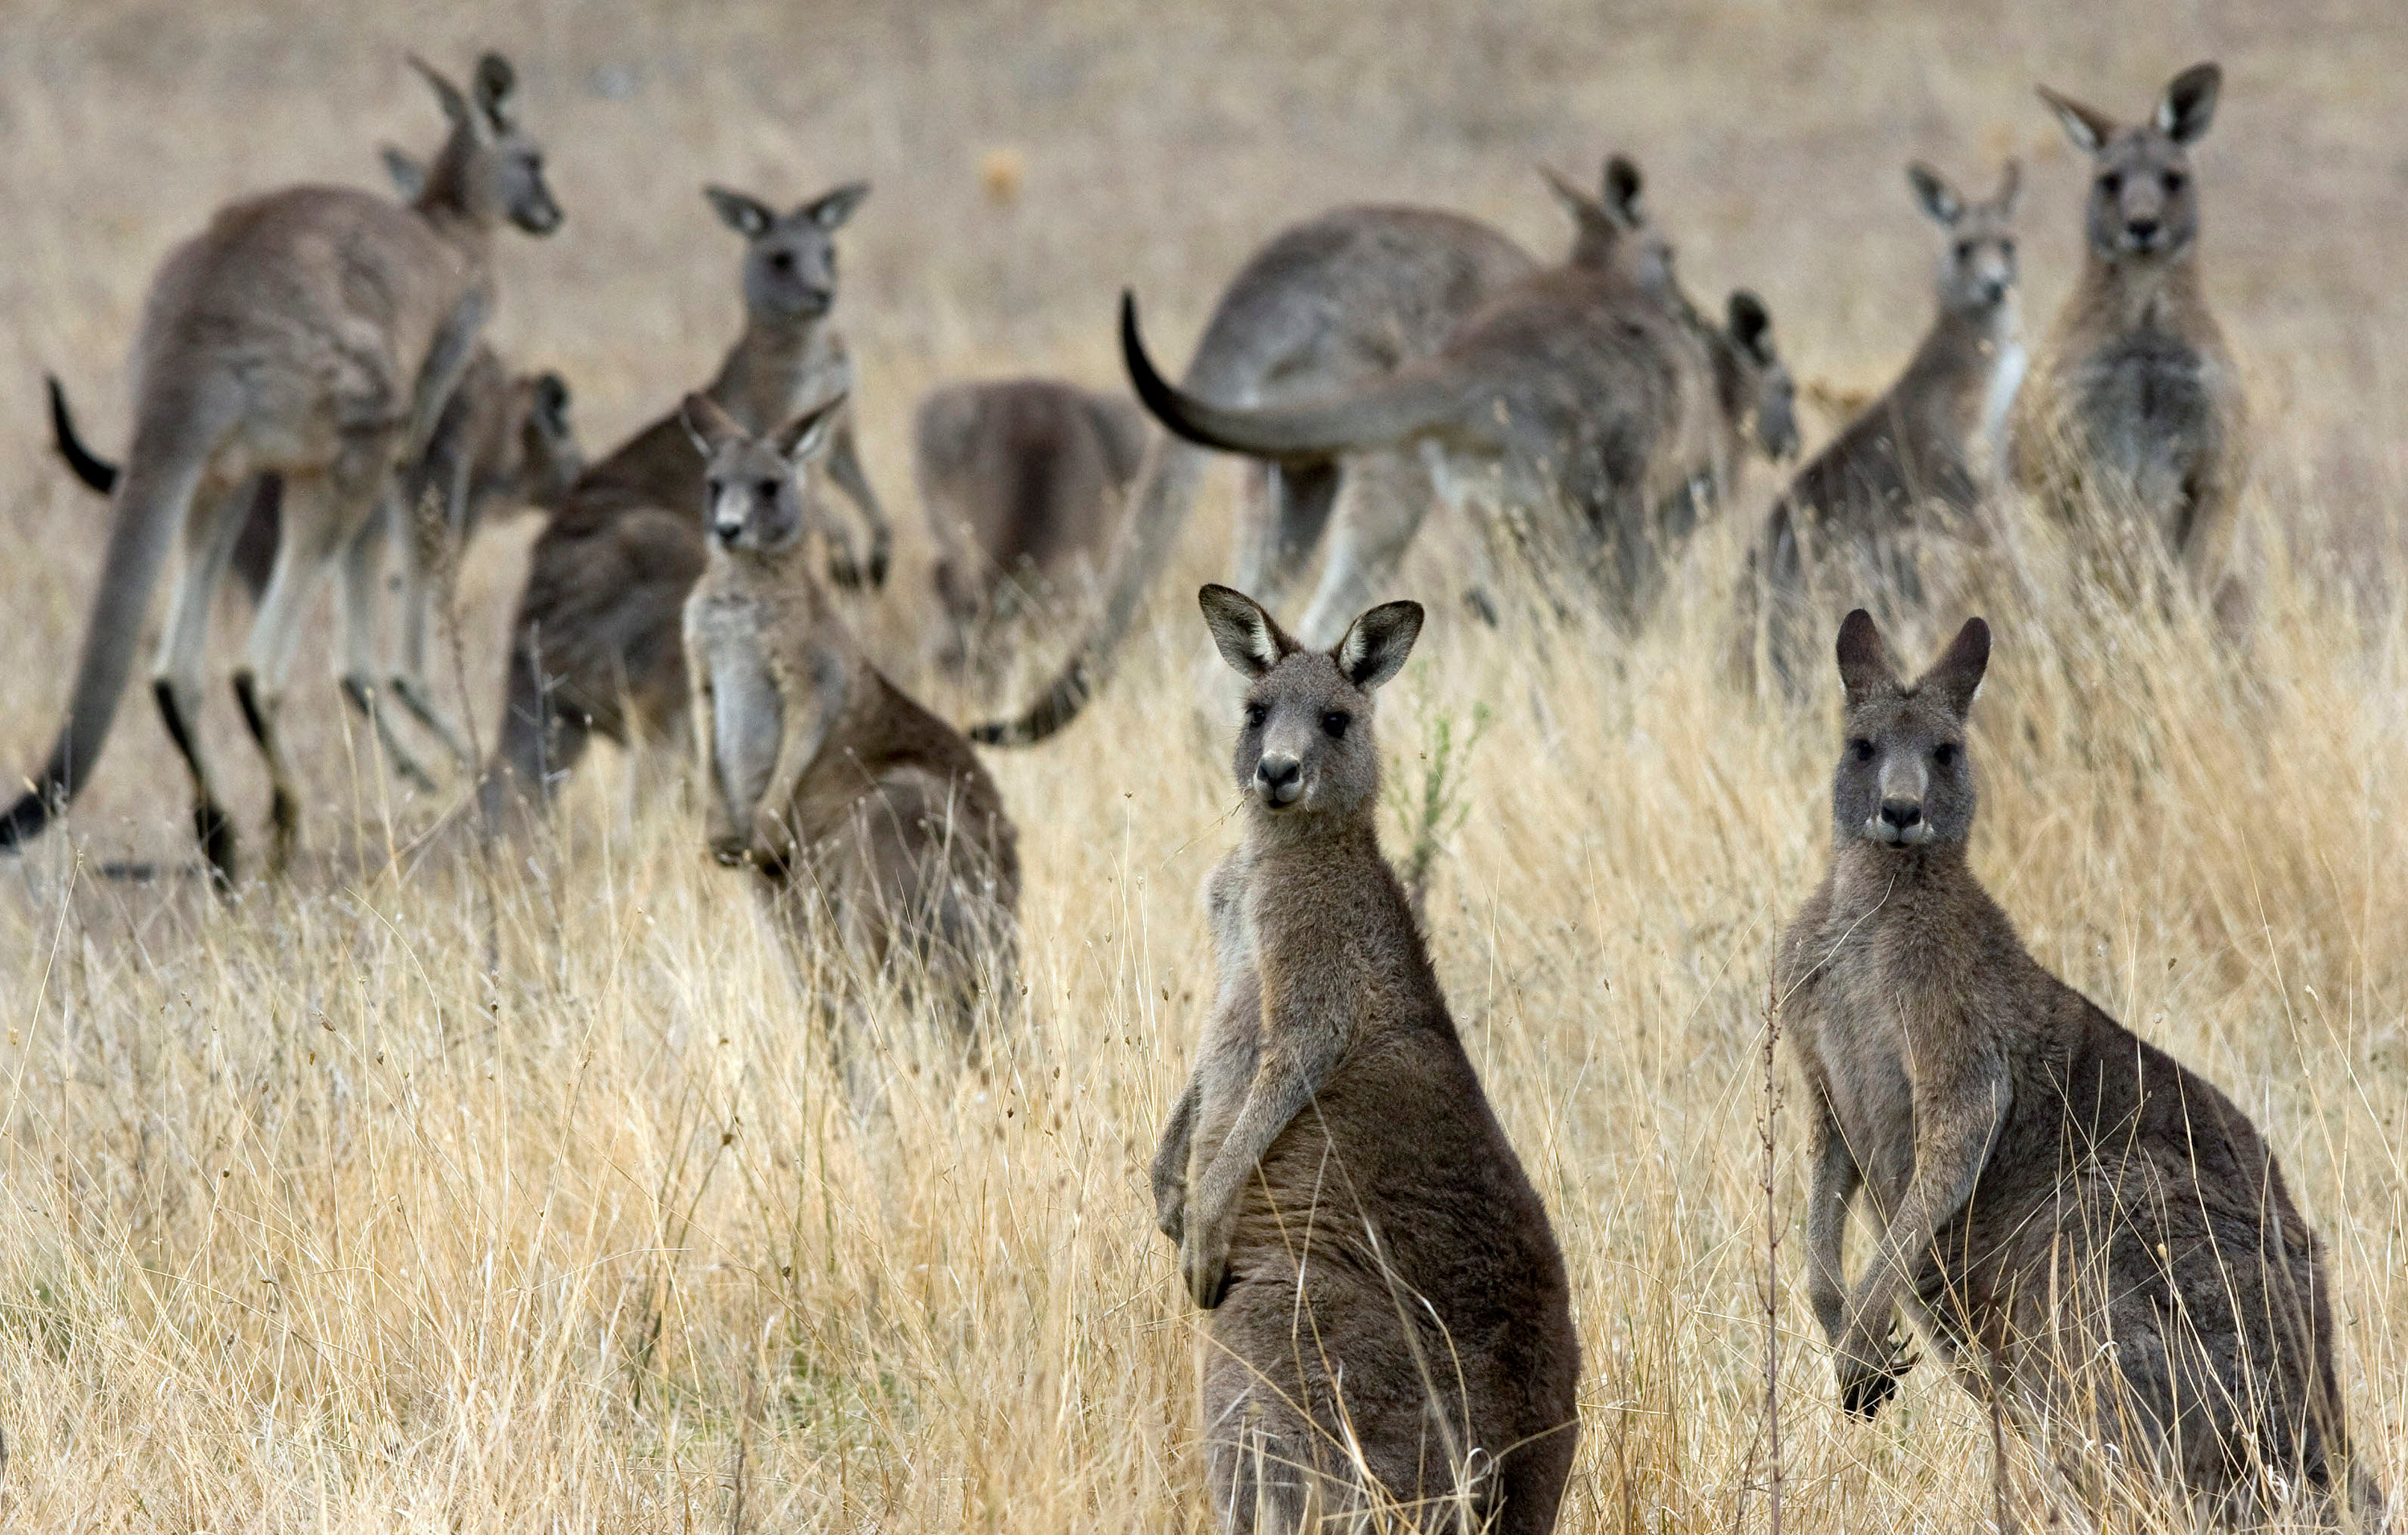 FILE PHOTO - Some of the kangaroos that are to be culled are seen on the Department of Defence property in Belconnen, Canberra